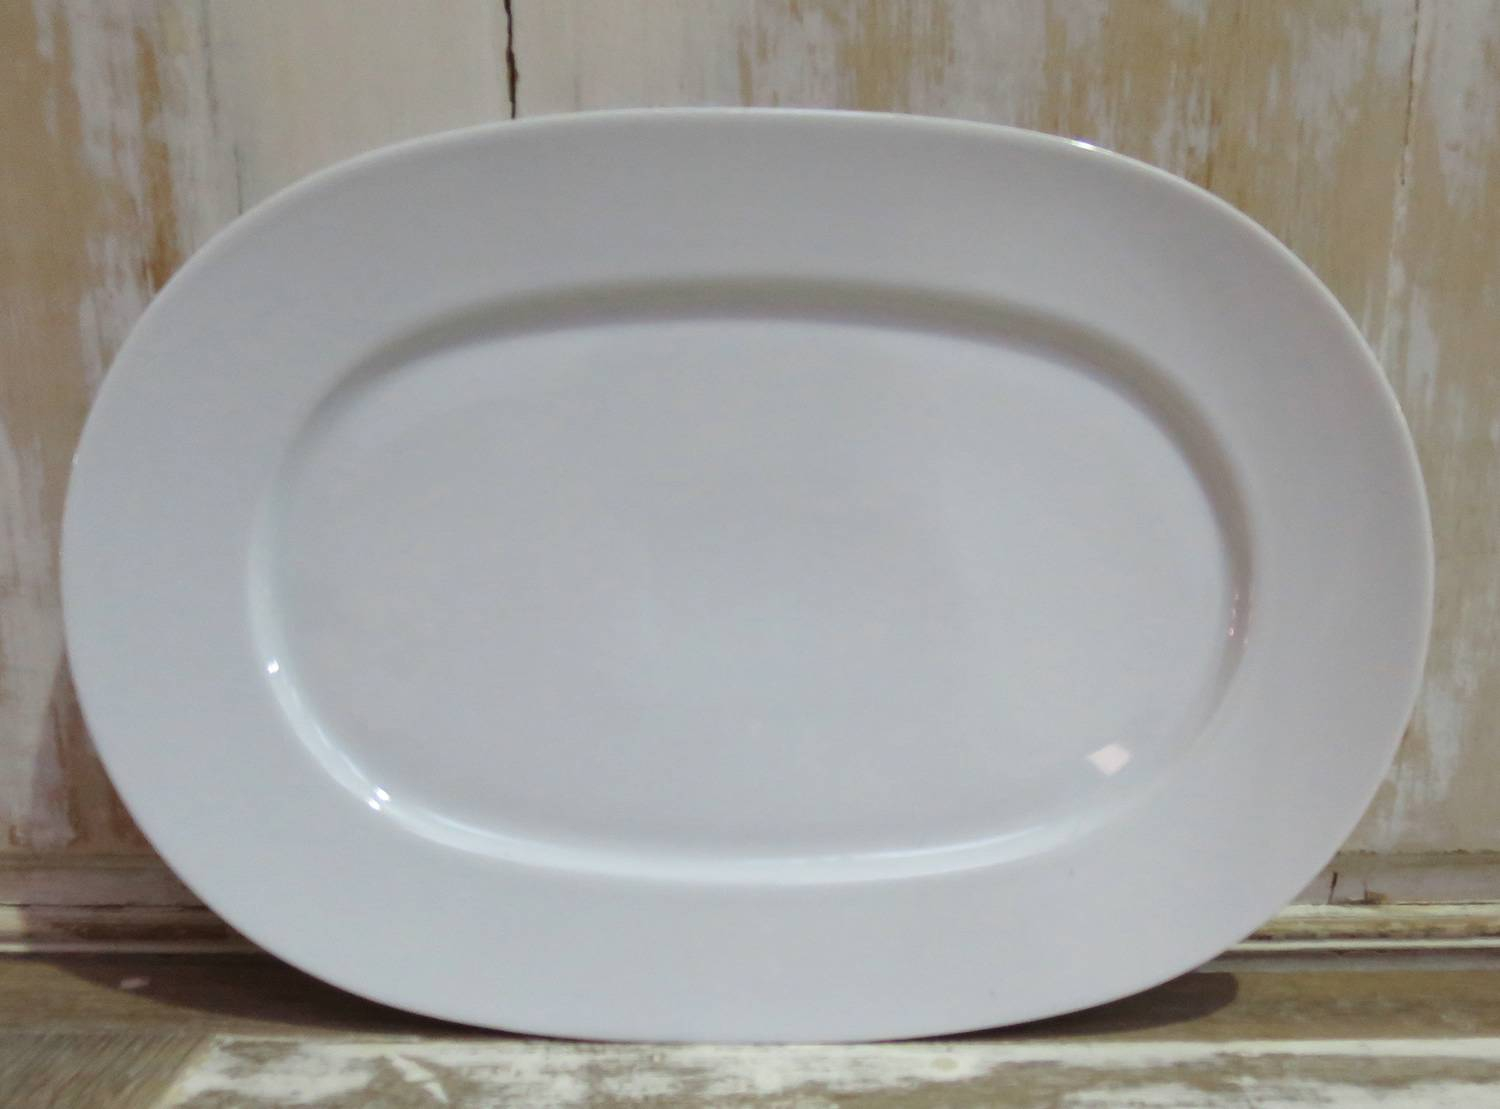 Simple white porcelain Oval Serving Plate